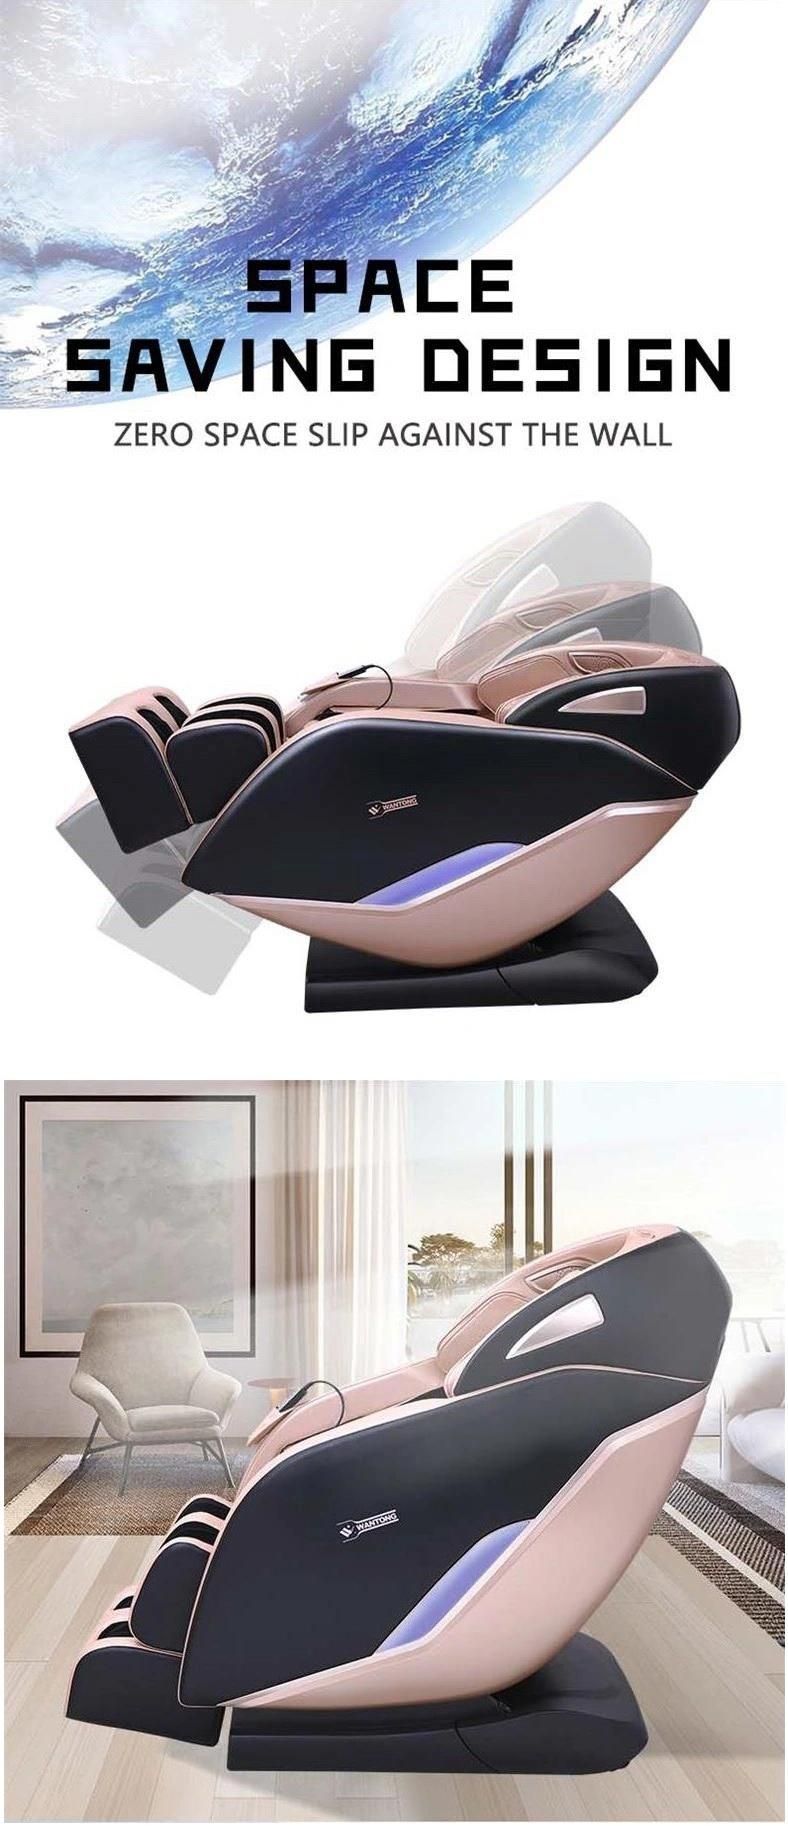 Hot Sale Multi-Function Full-Body Fully Automatic Massage Chair for Intelligent Home